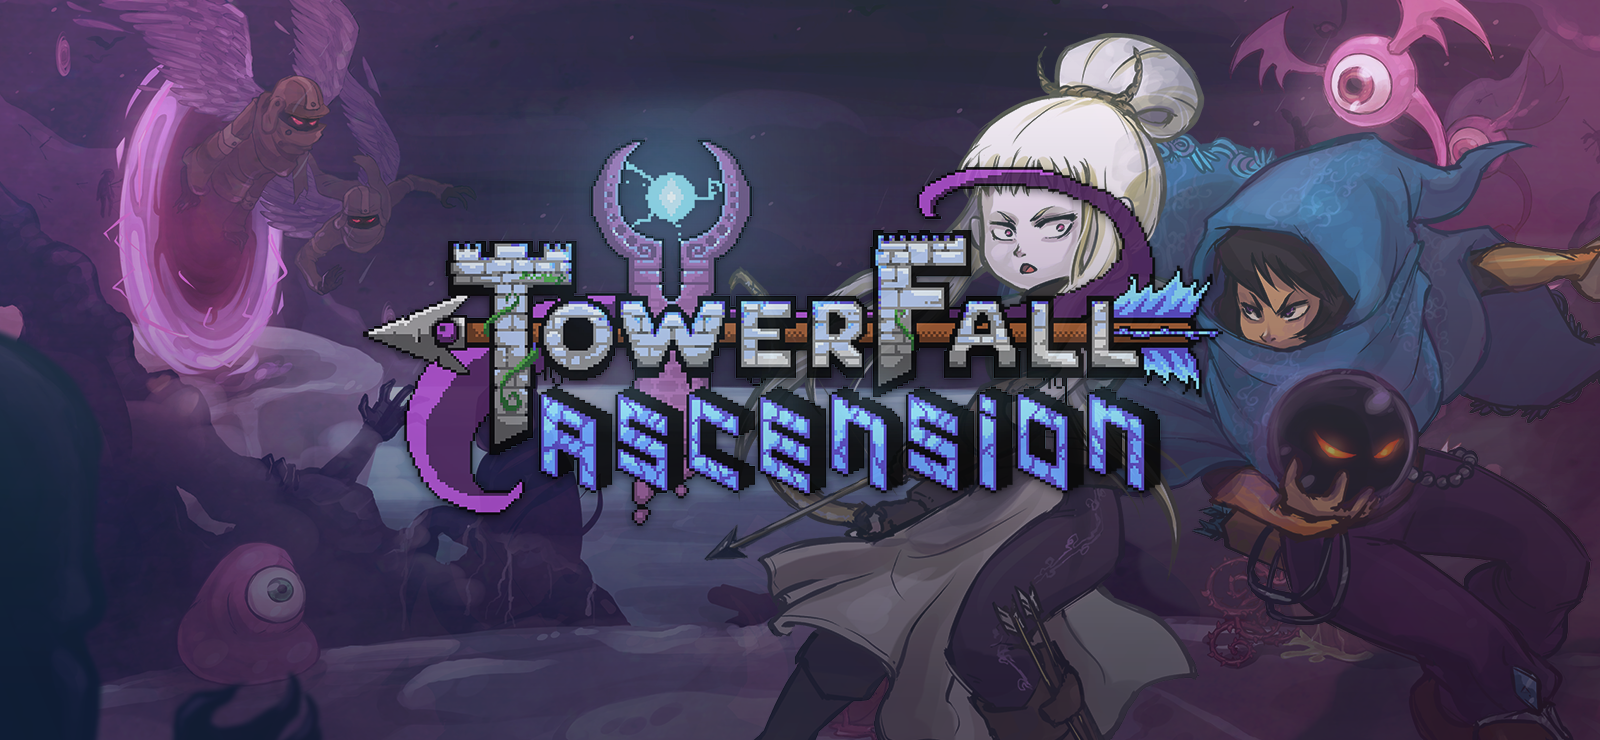 Towerfall: Ascension